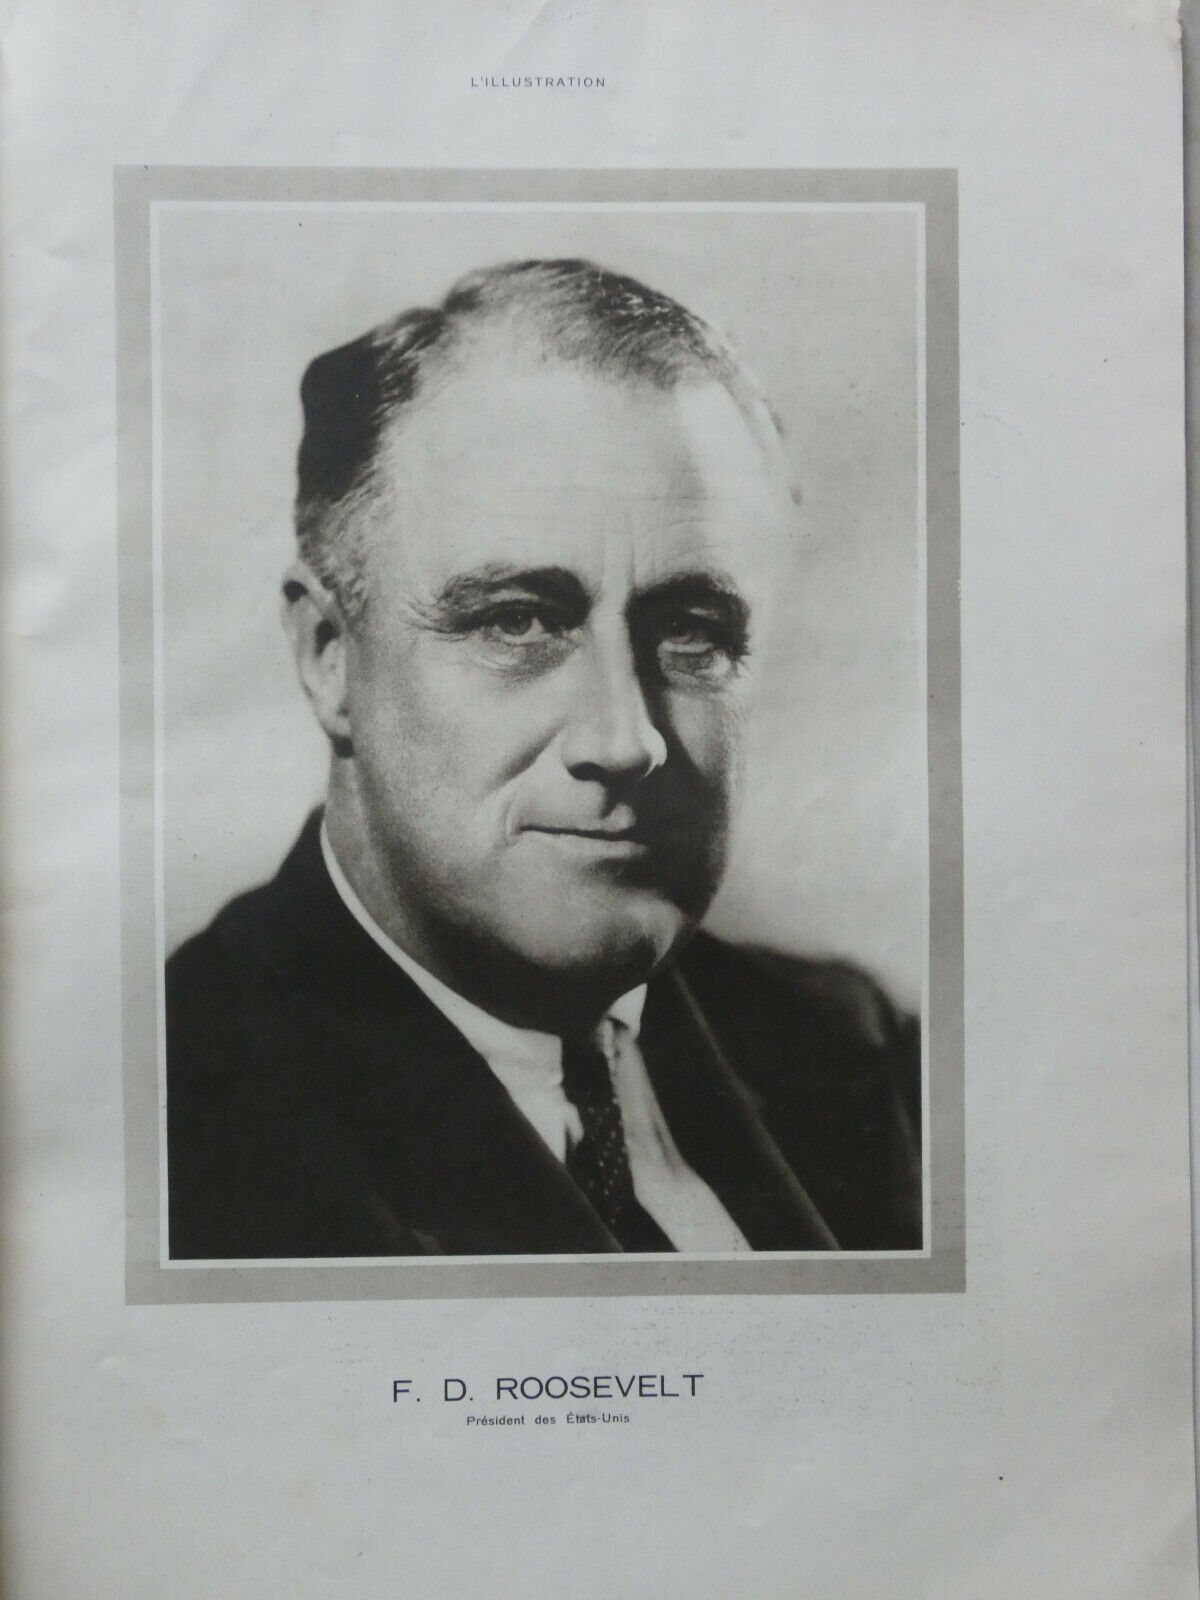 ORIGINAL PRESS ARTICLE FROM 1937 Portrait F.D. ROOSEVELT President of the U.S.A